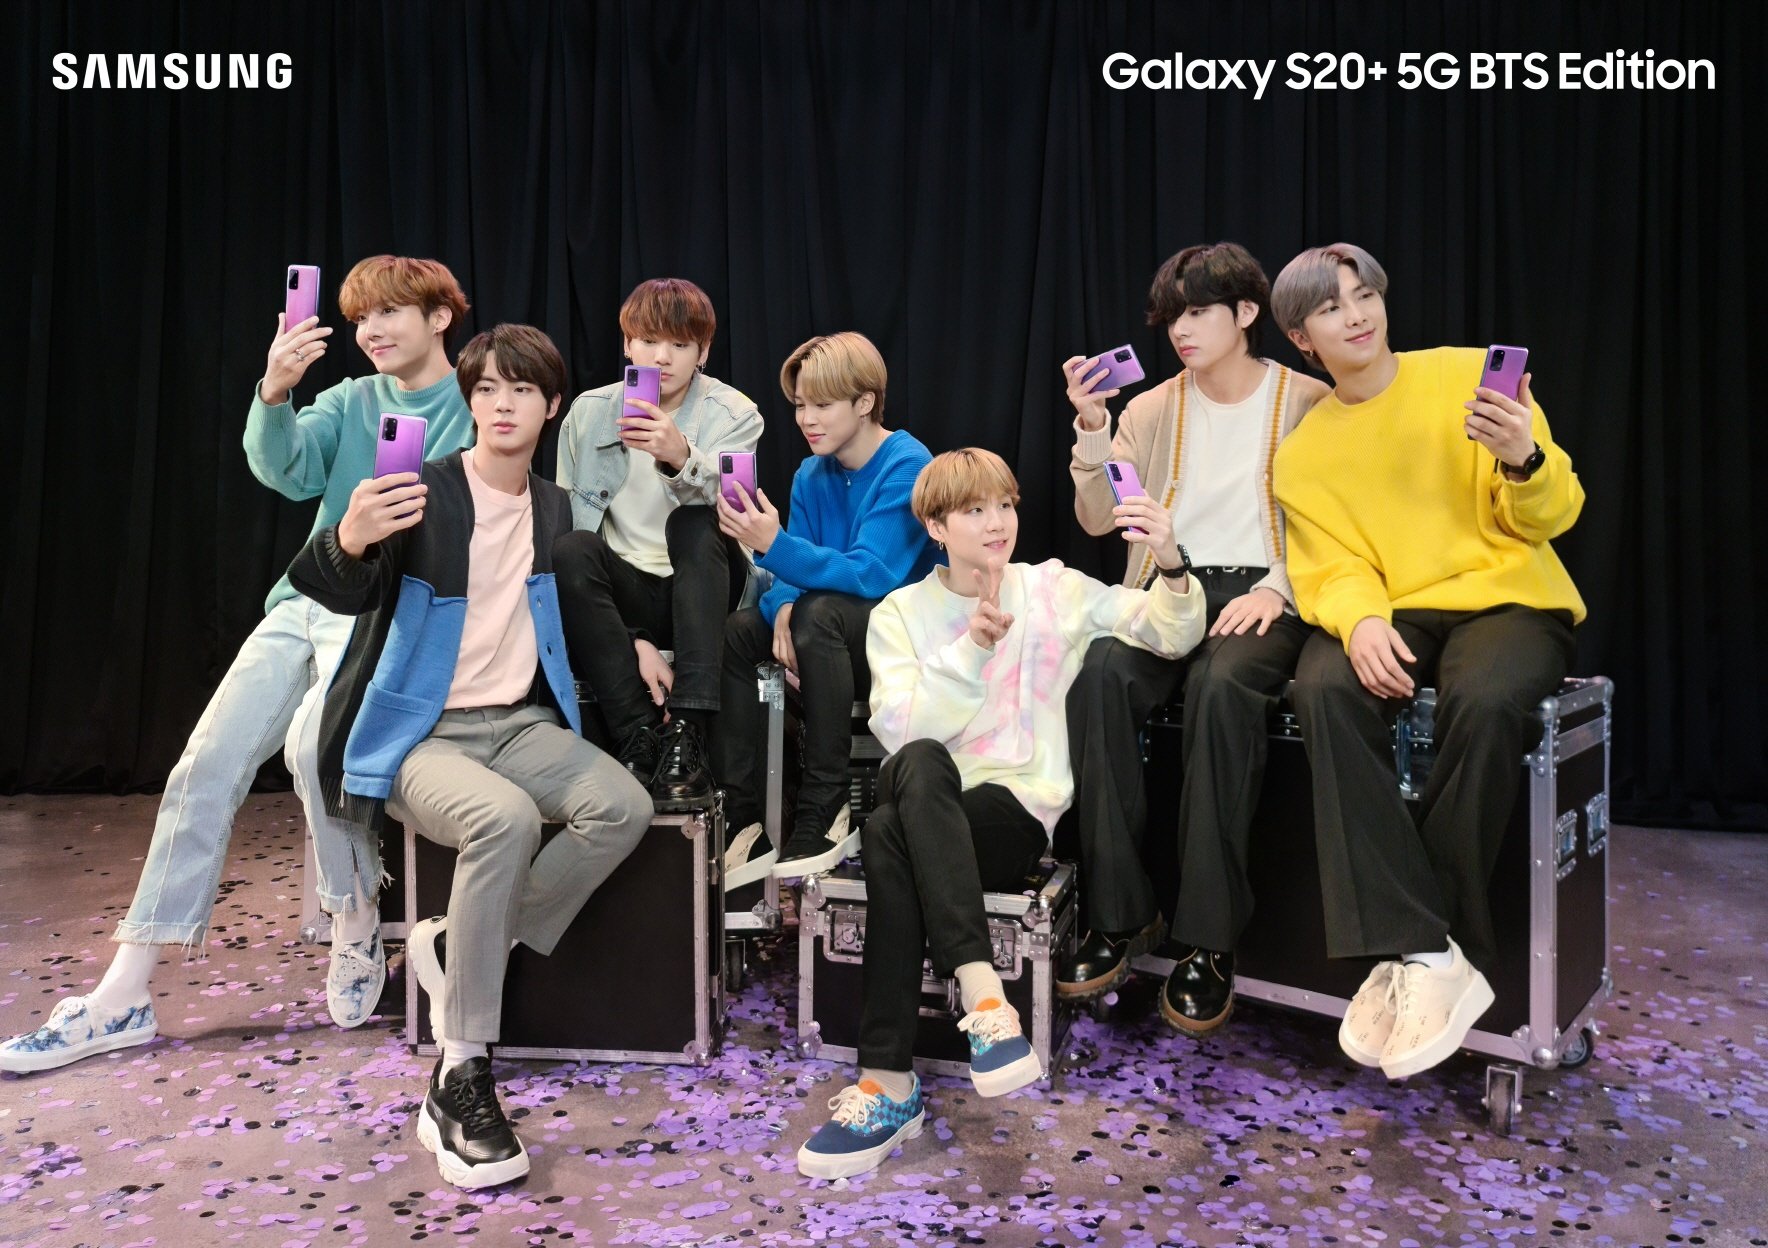 Samsung launches BTS Edition Galaxy S20+ and Galaxy Buds+ for the